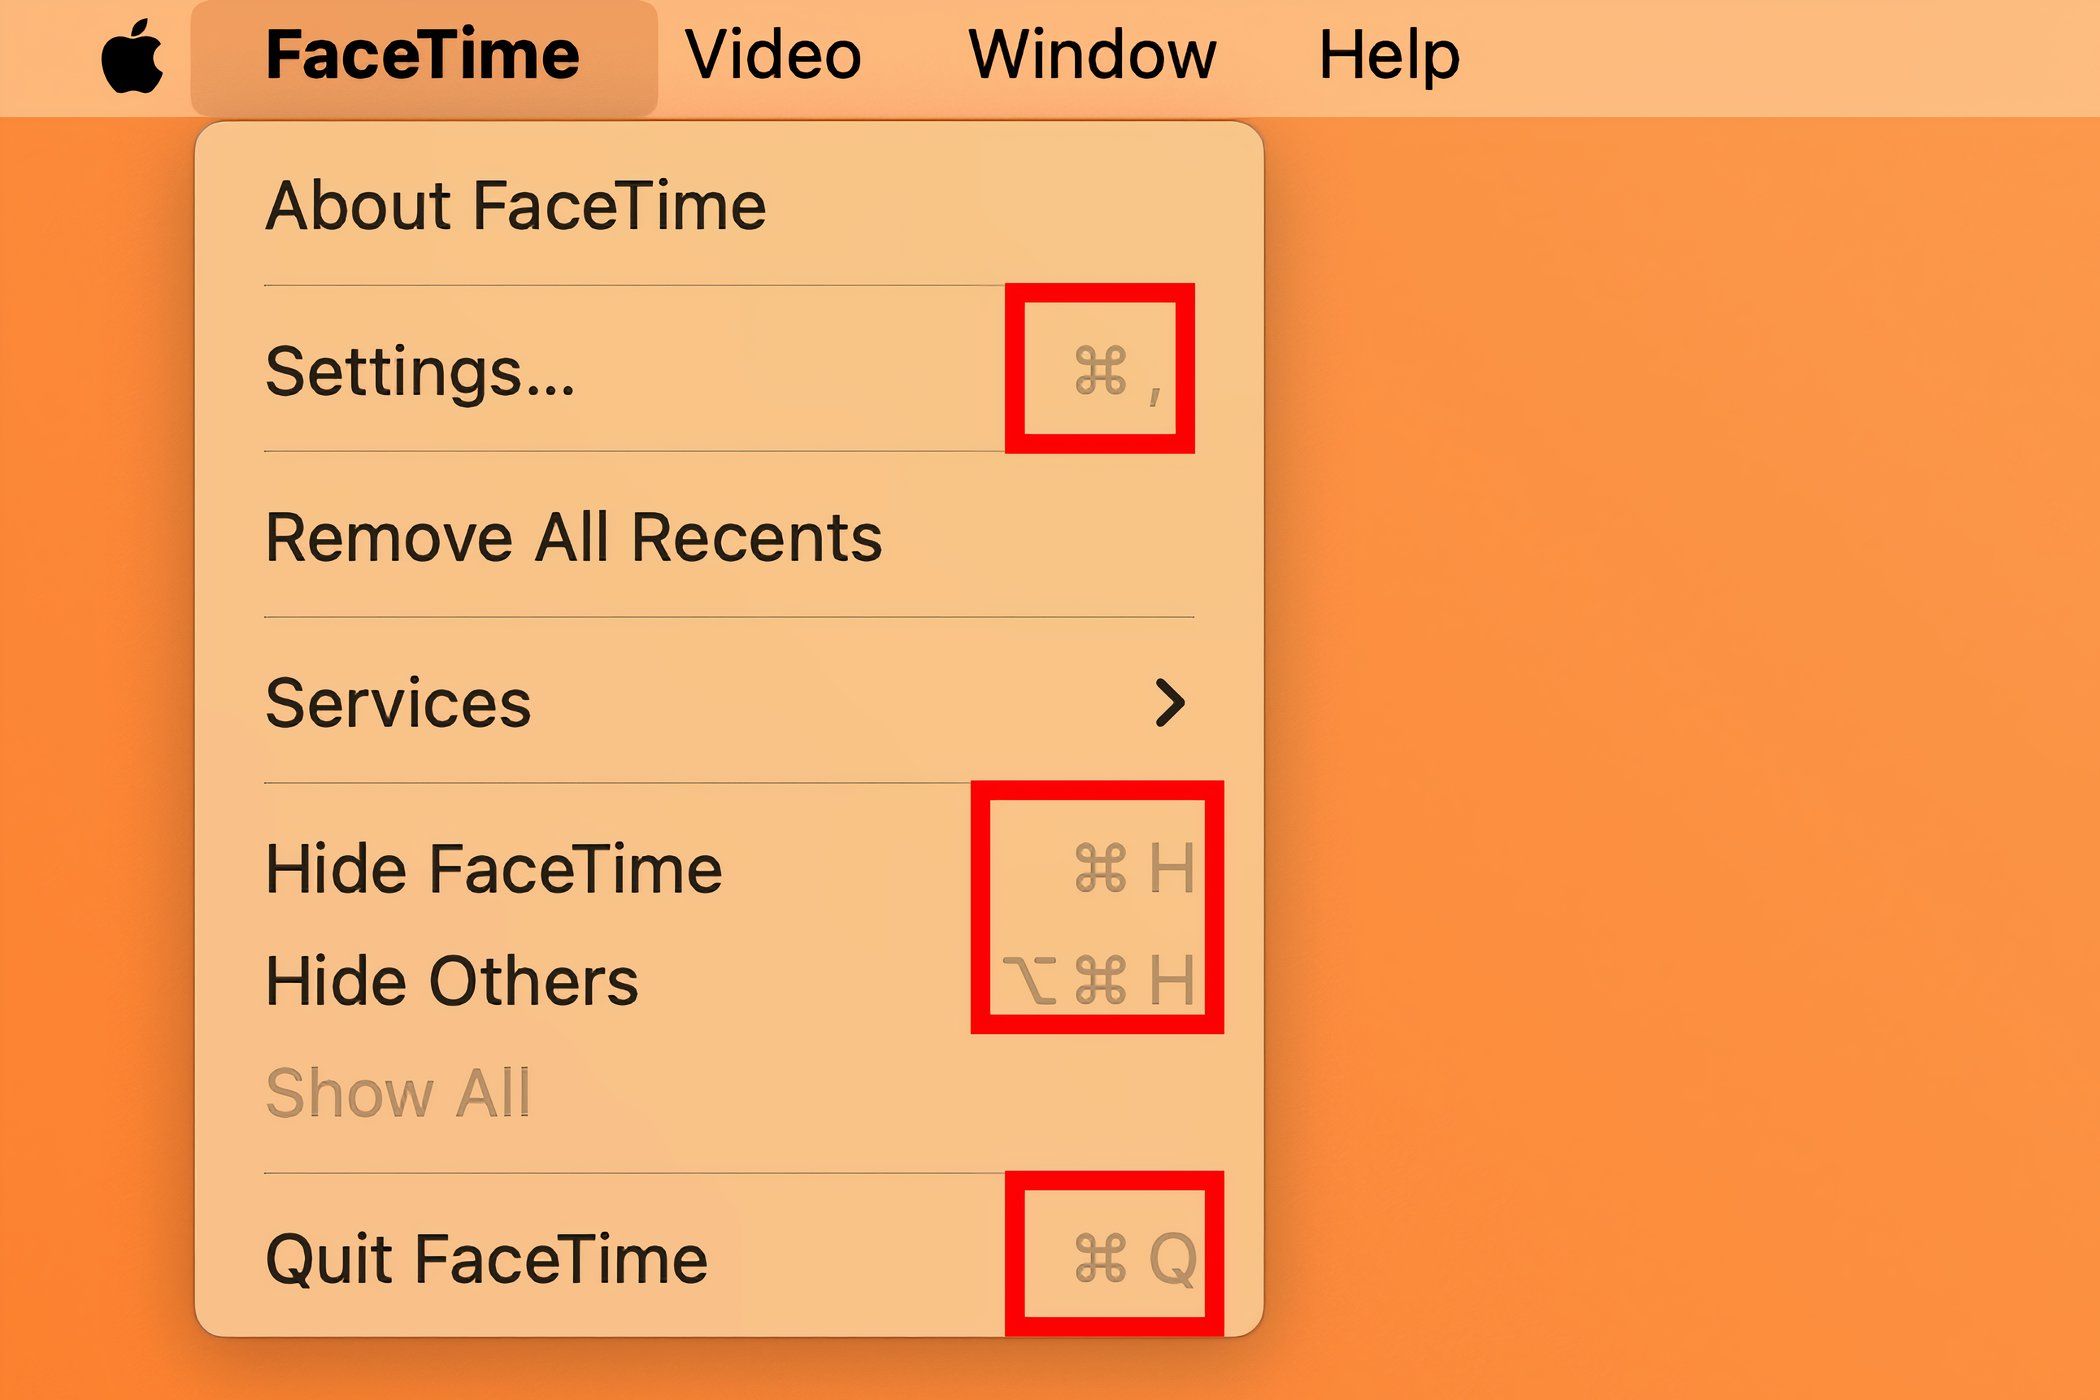 The FaceTime for Mac menu with the keyboard shortcuts higlhighted.